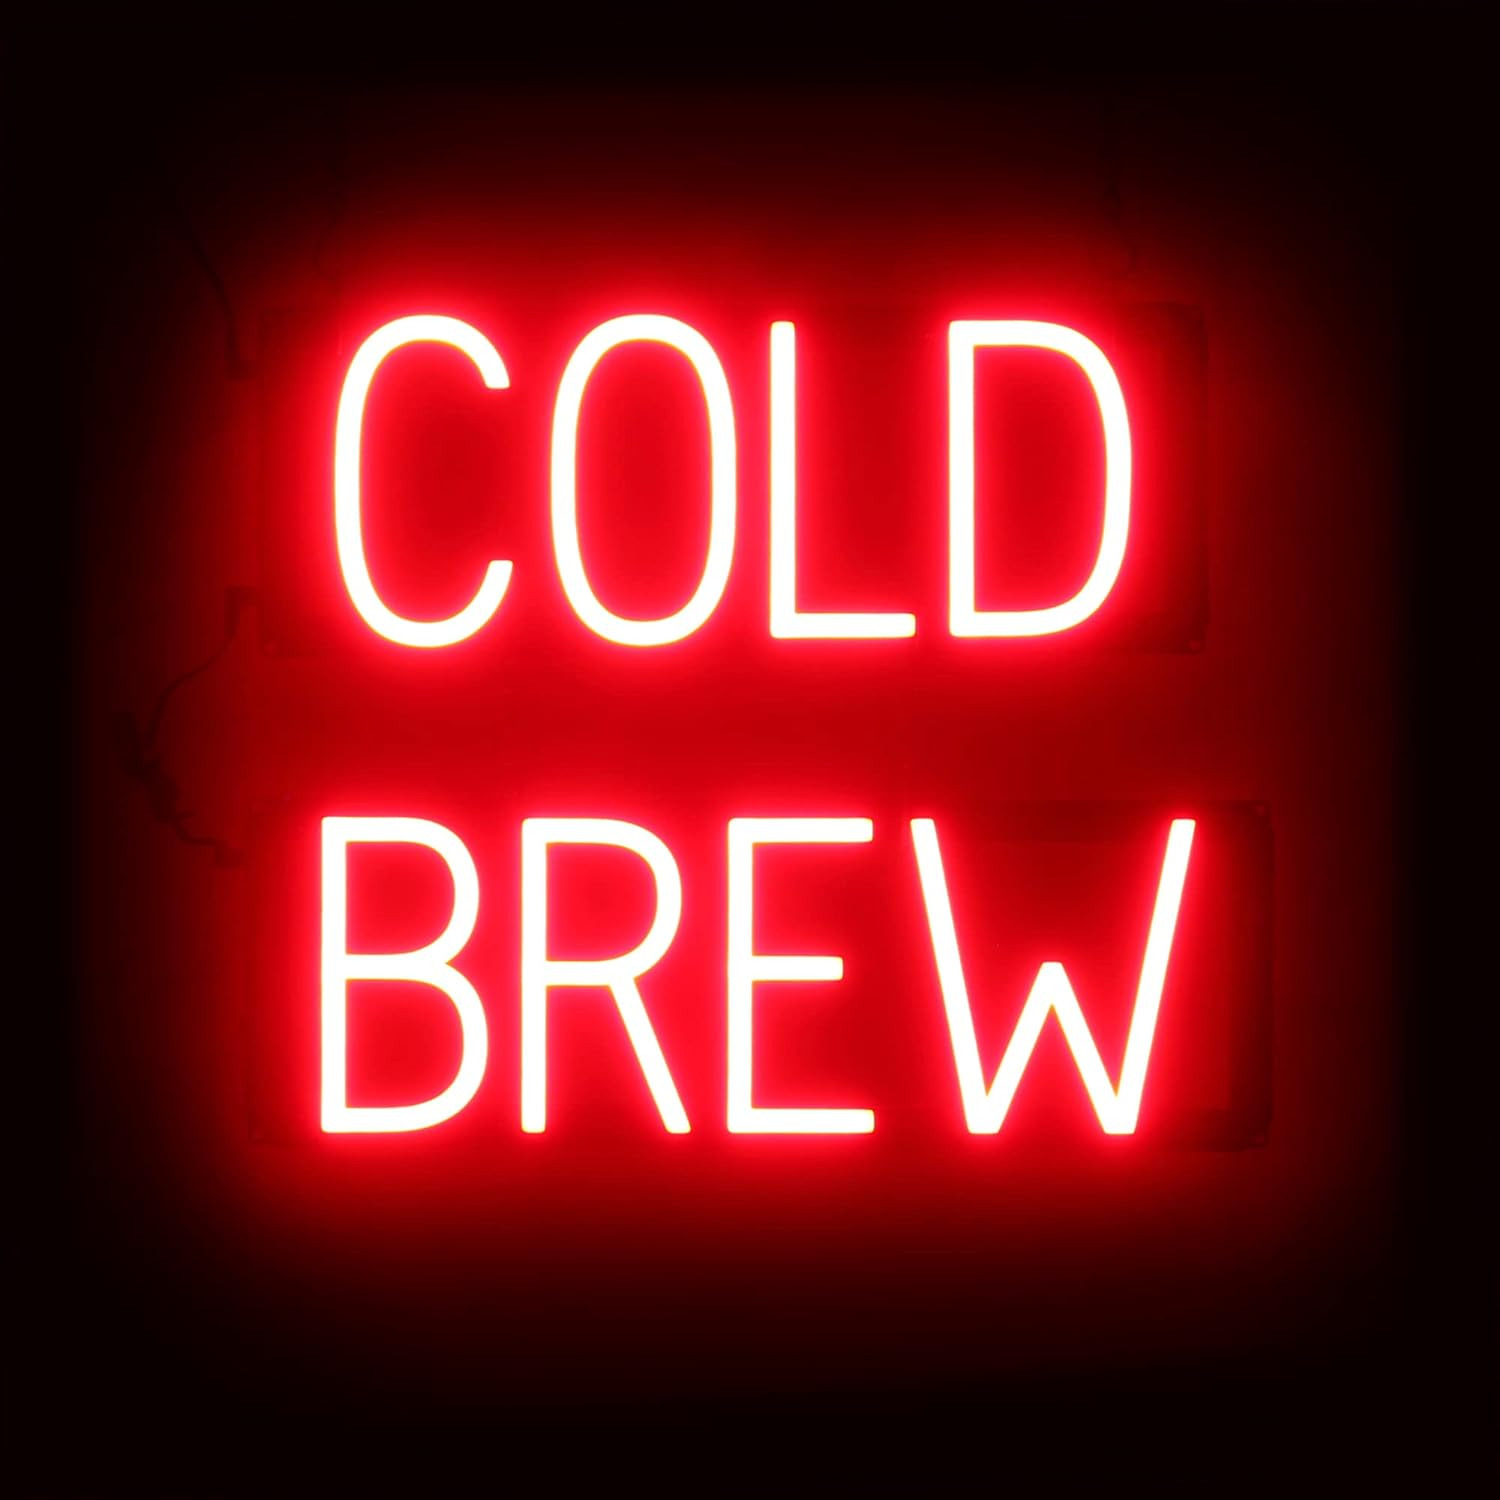 COLD BREW Neon-Led Sign for Cafes. 18.2